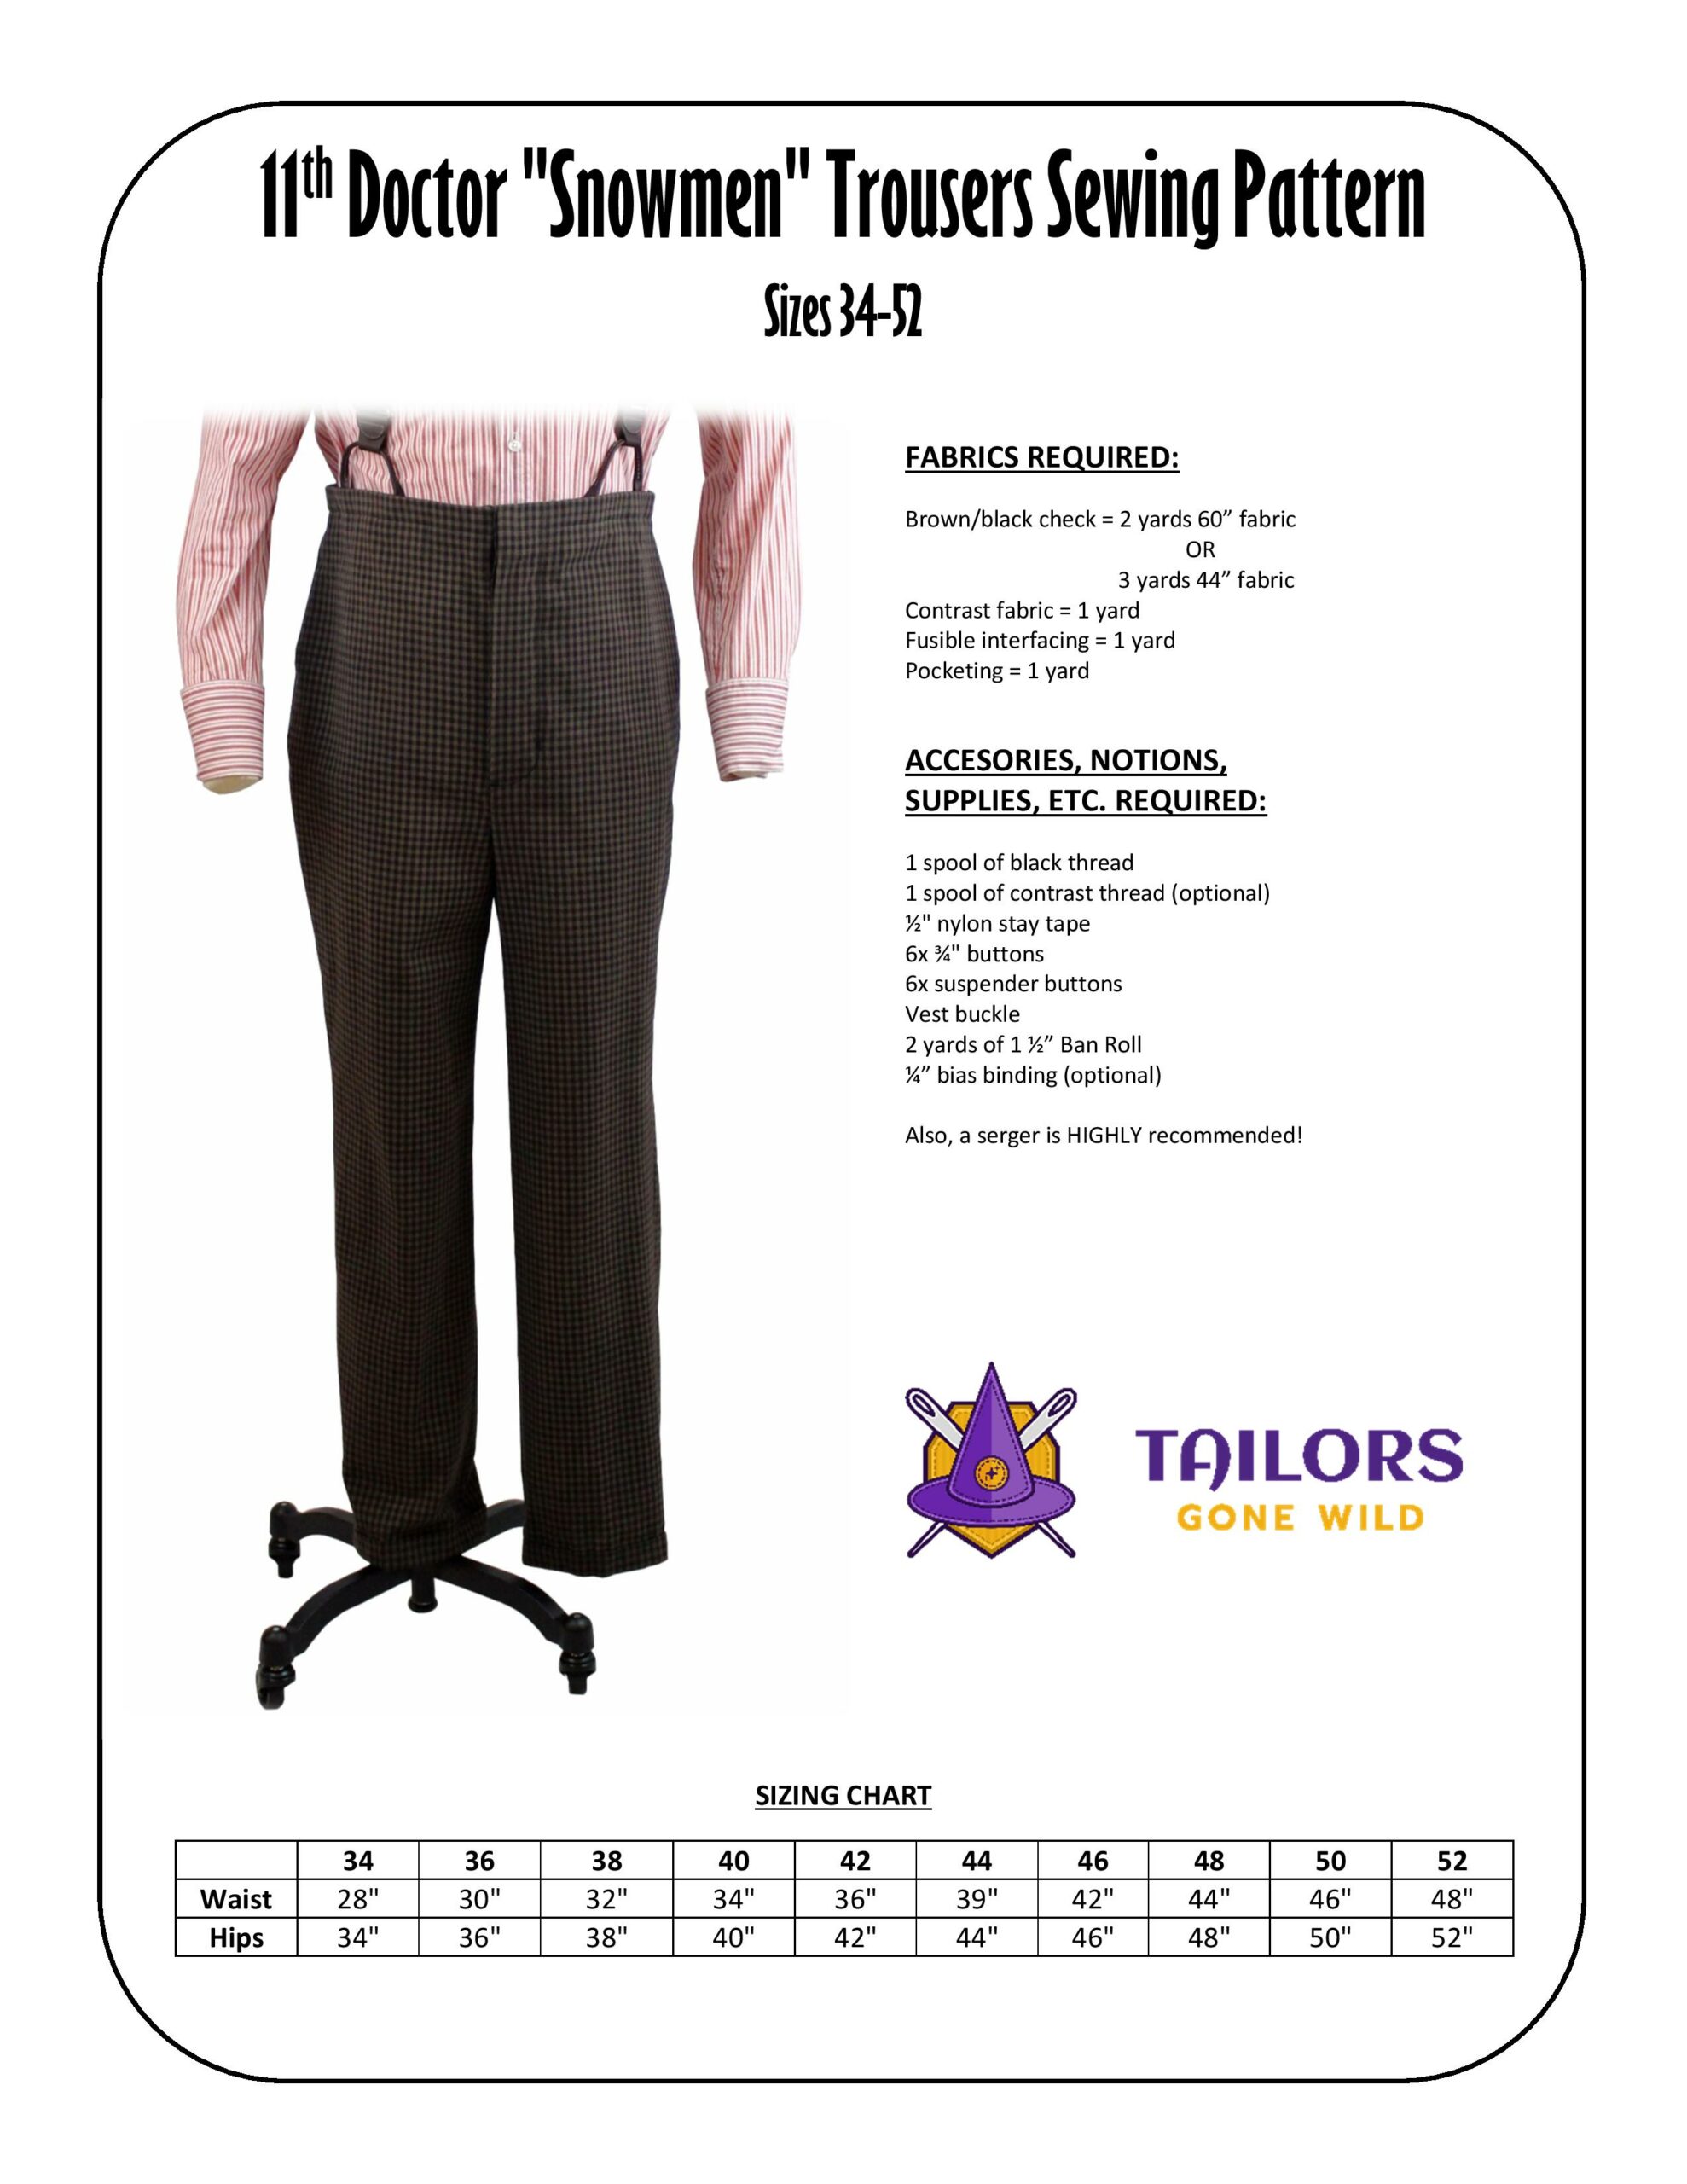 11th Doctor Snowmen trousers sewing pattern - Tailors Gone Wild